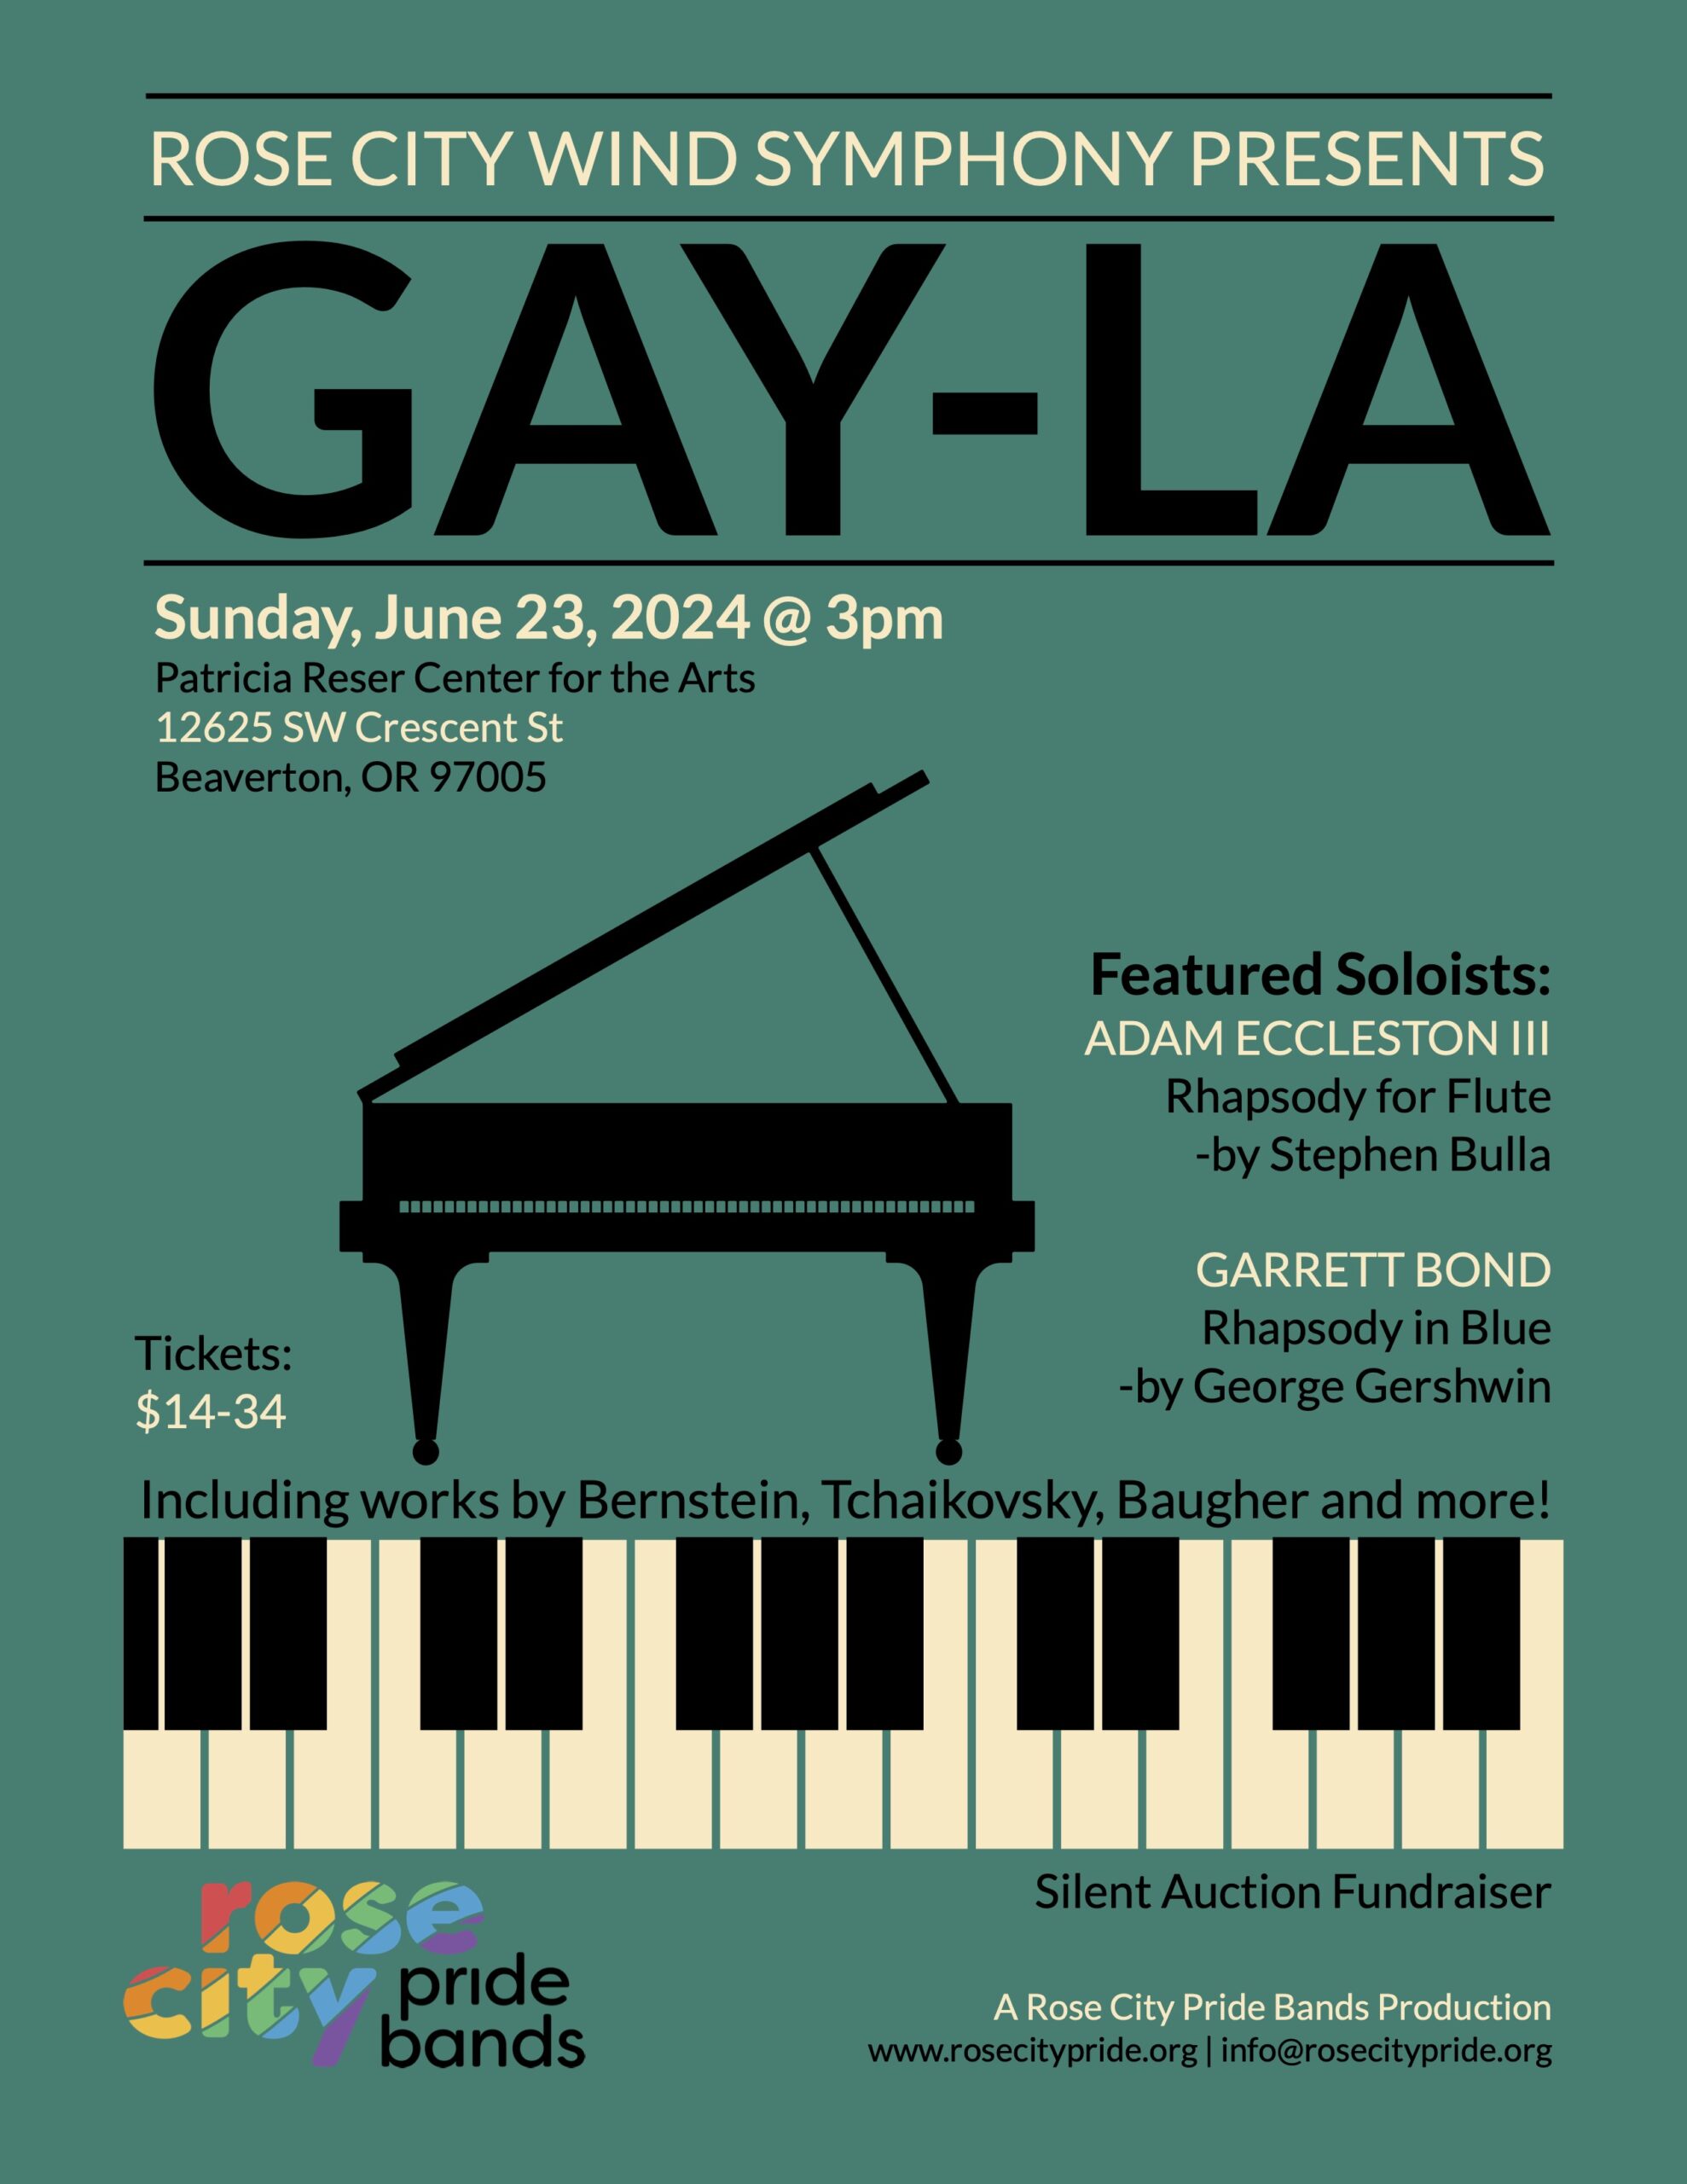 https://thereser.org/event/gay-la/